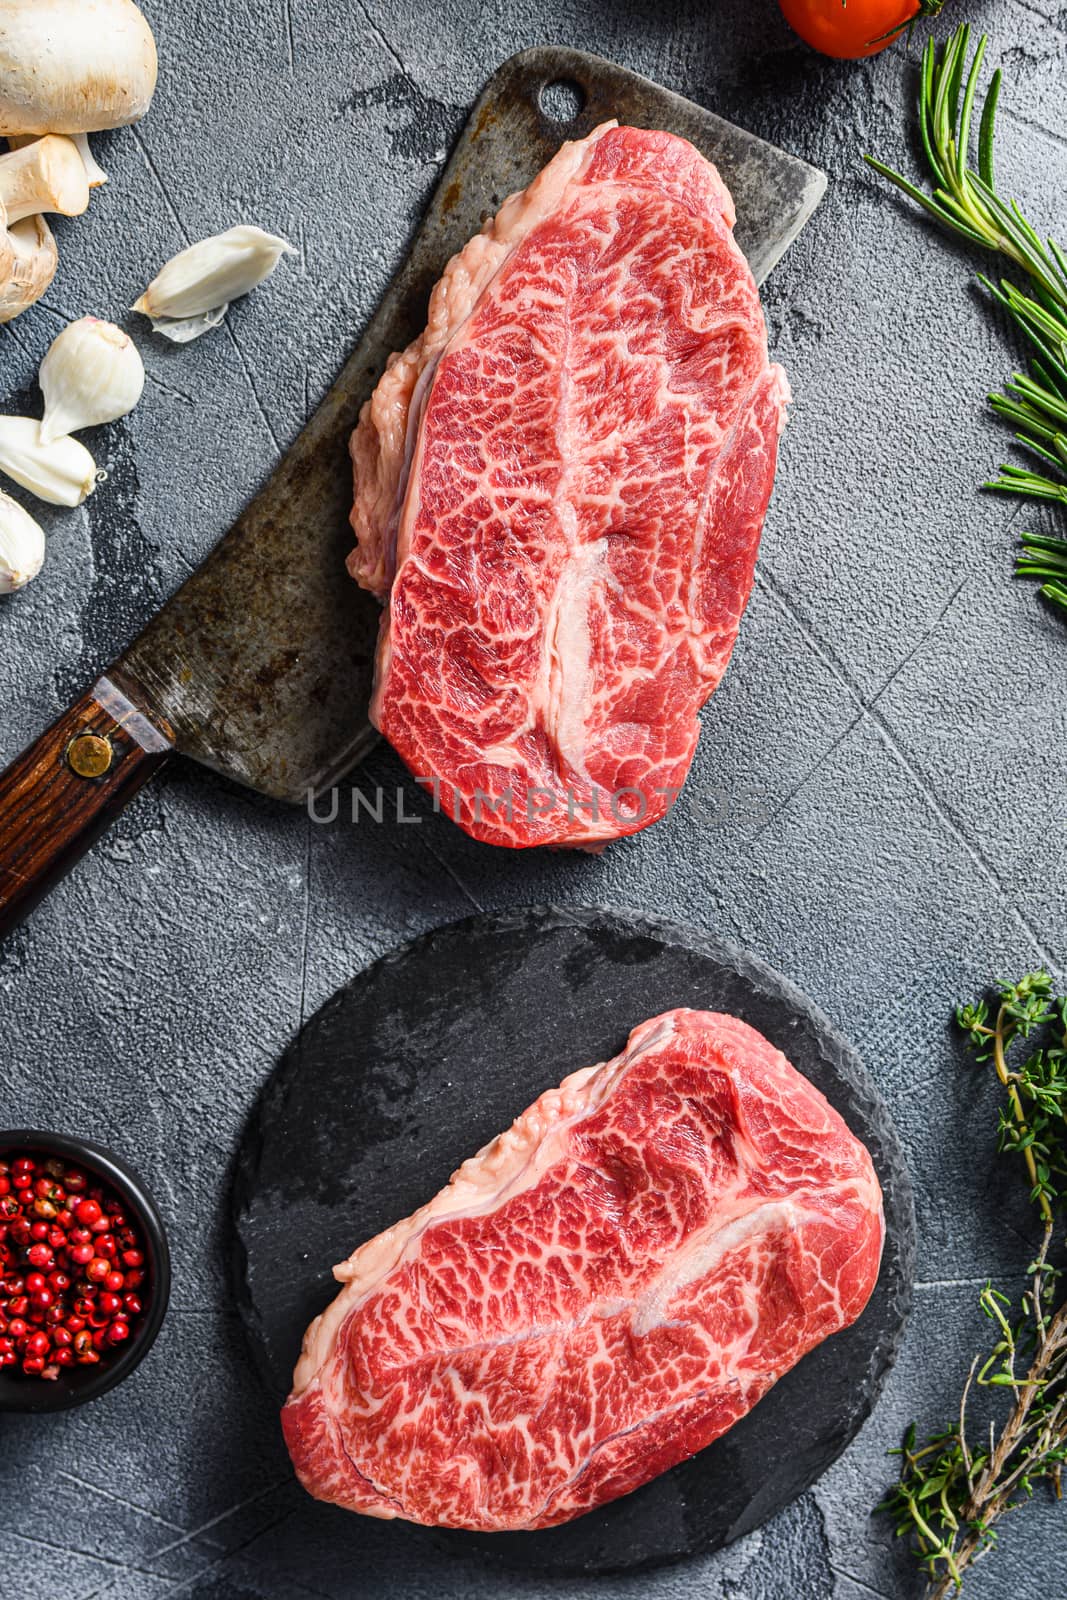 Raw top blade flat Ironcut, on black slate , and meat butcher cleaver marbled beef with herbs tomatoes peppercorns over grey stone surface background top view close up.